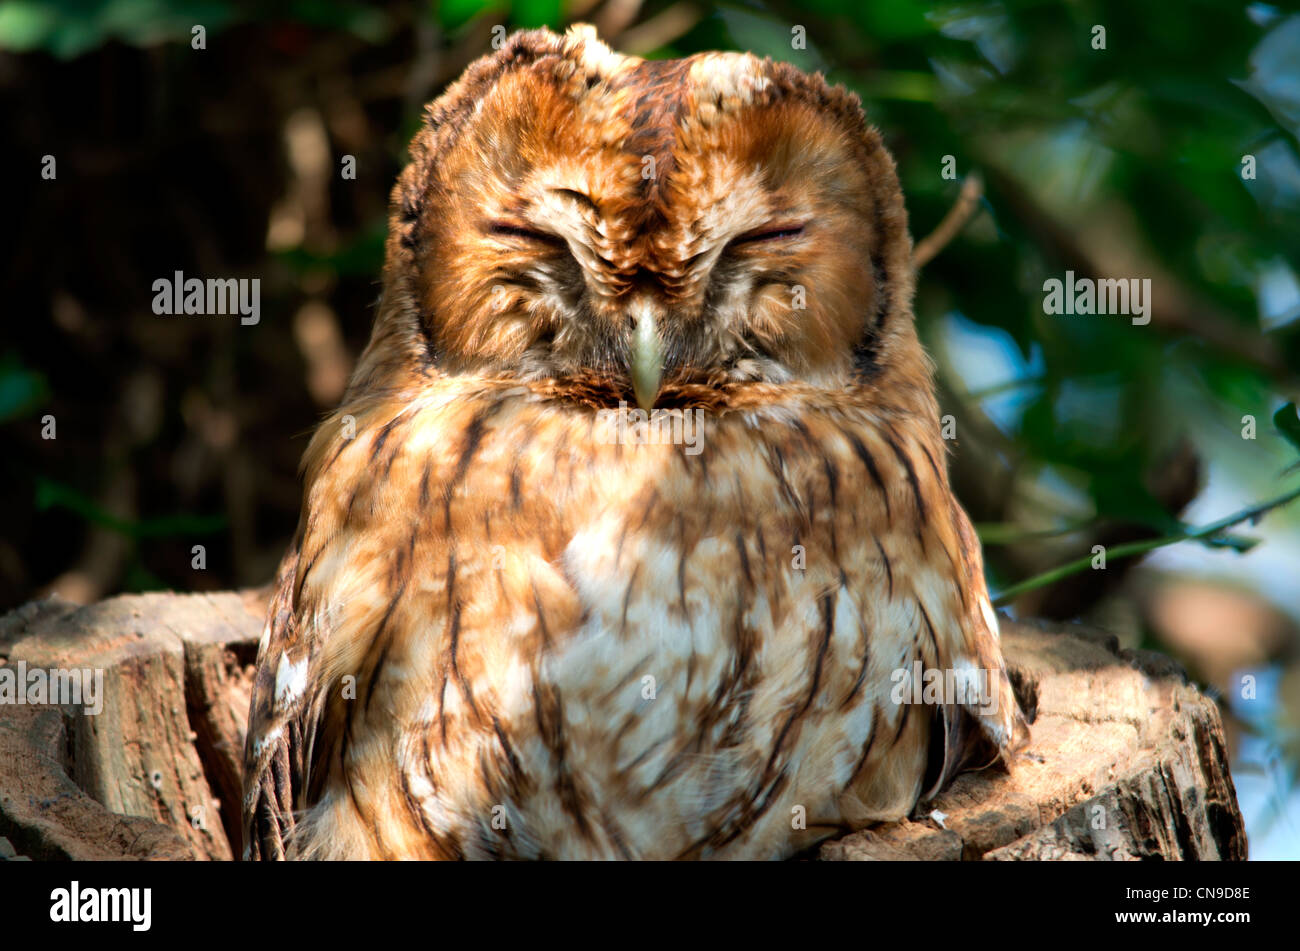 Tawny Owl sitting in a tree Stock Photo